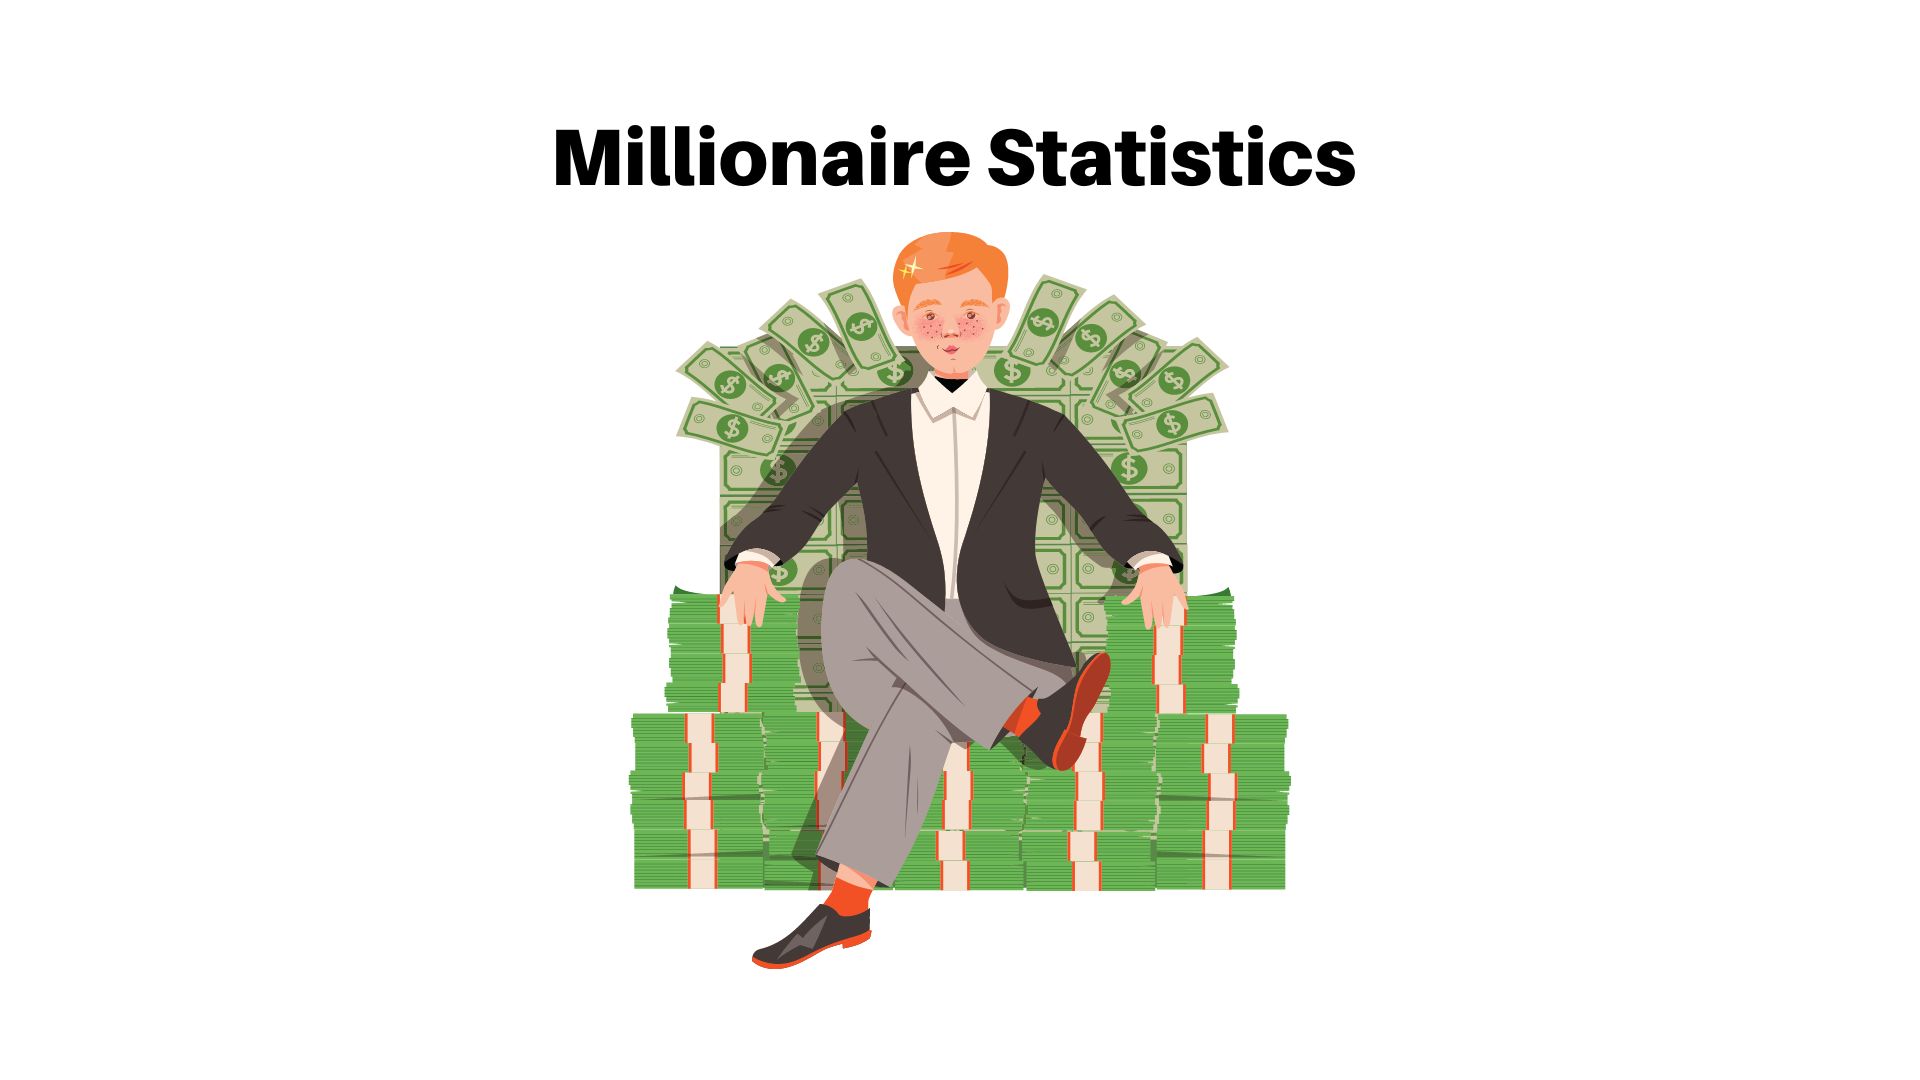 Millionaire Statistics – By Demographic, Industry, Region and Country